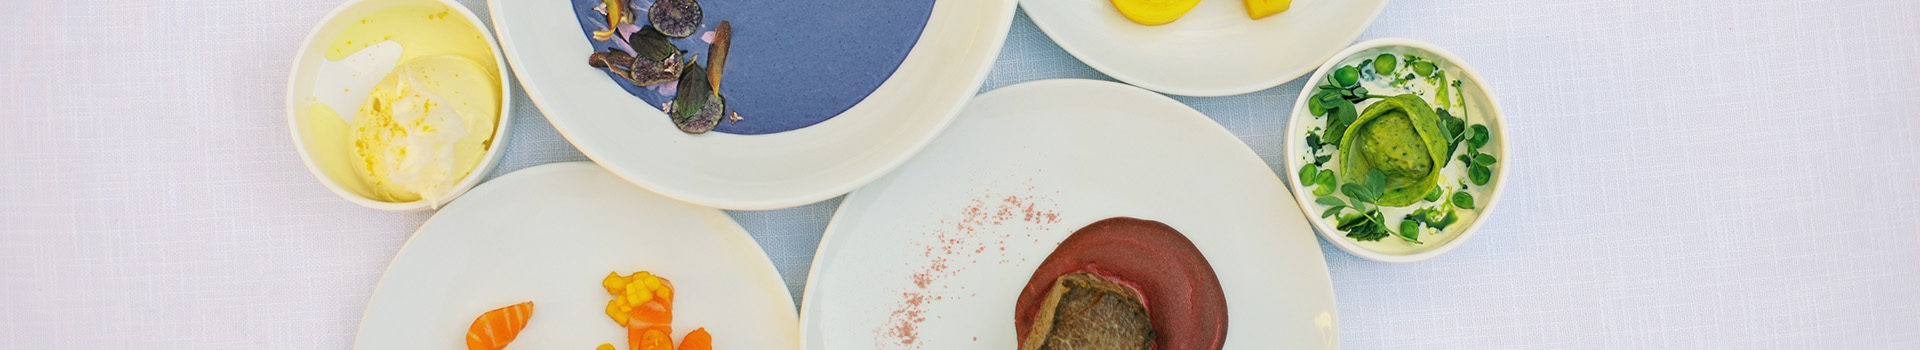 Overhead of white plates on a textured white background. From left to right, in the left top is a small bowl of ice cream, next to it large bowl of purple potato soup cut off, next to it a plate of yellow heirloom tomatoes, and a small bowl of a green tortellini. At the bottom left, is orange salmon and next to it is a red bison tenderloin with cherries three ways